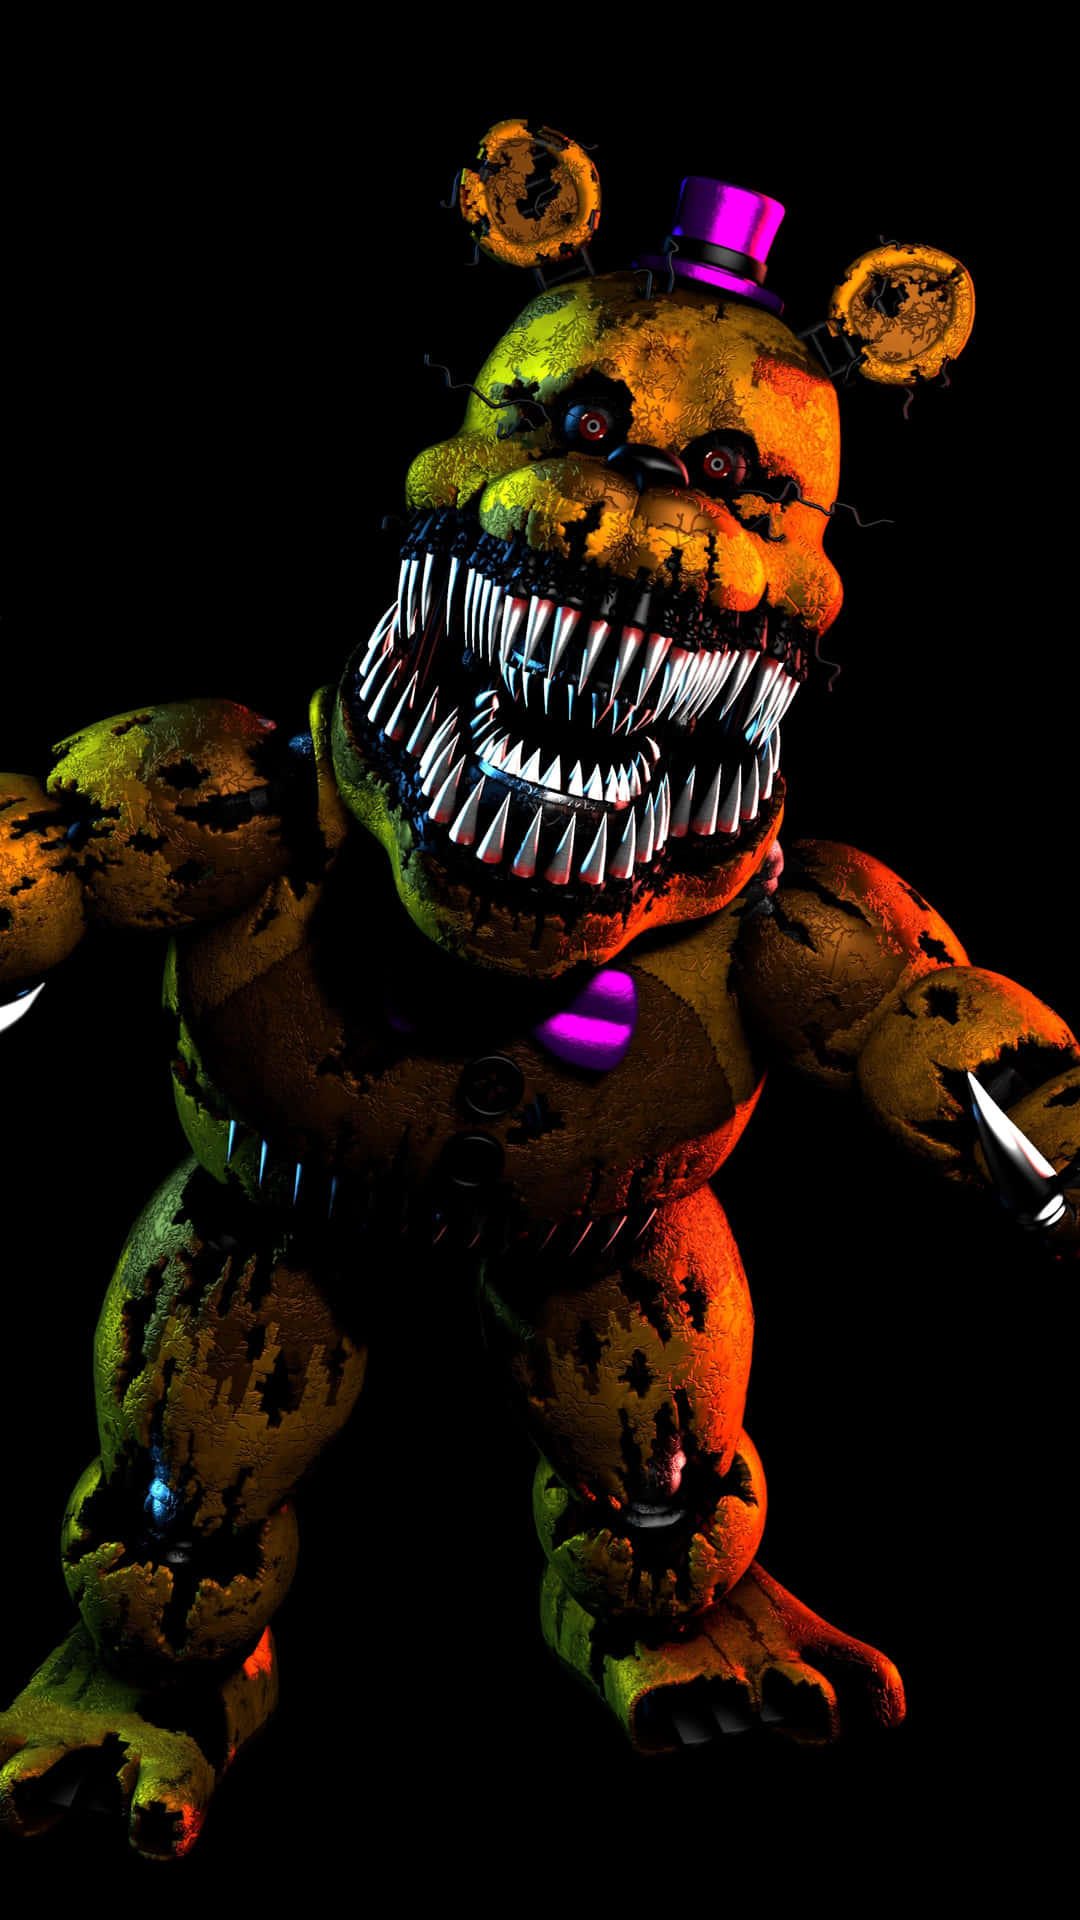 100+] Five Nights At Freddys 4 Wallpapers